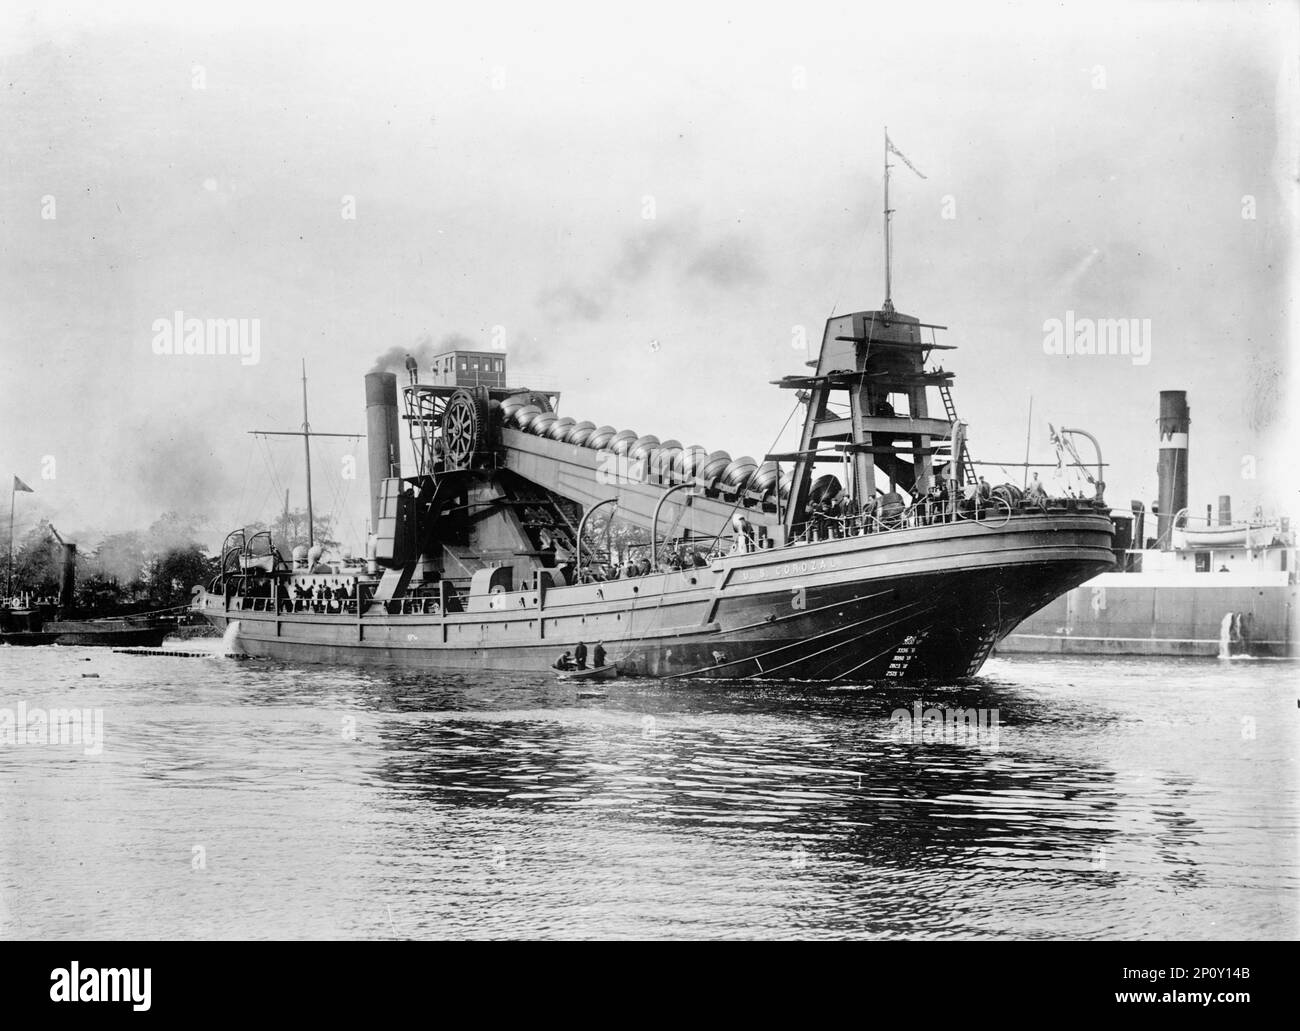 Panama Canal, 1913. The U.S. Corozal dredger working on the Culebra Cut, which was a difficult section of the canal, prone to mudslides. The Corozal was built at Simon's shipyard in Renfrew on the River Clyde in Scotland. Stock Photo